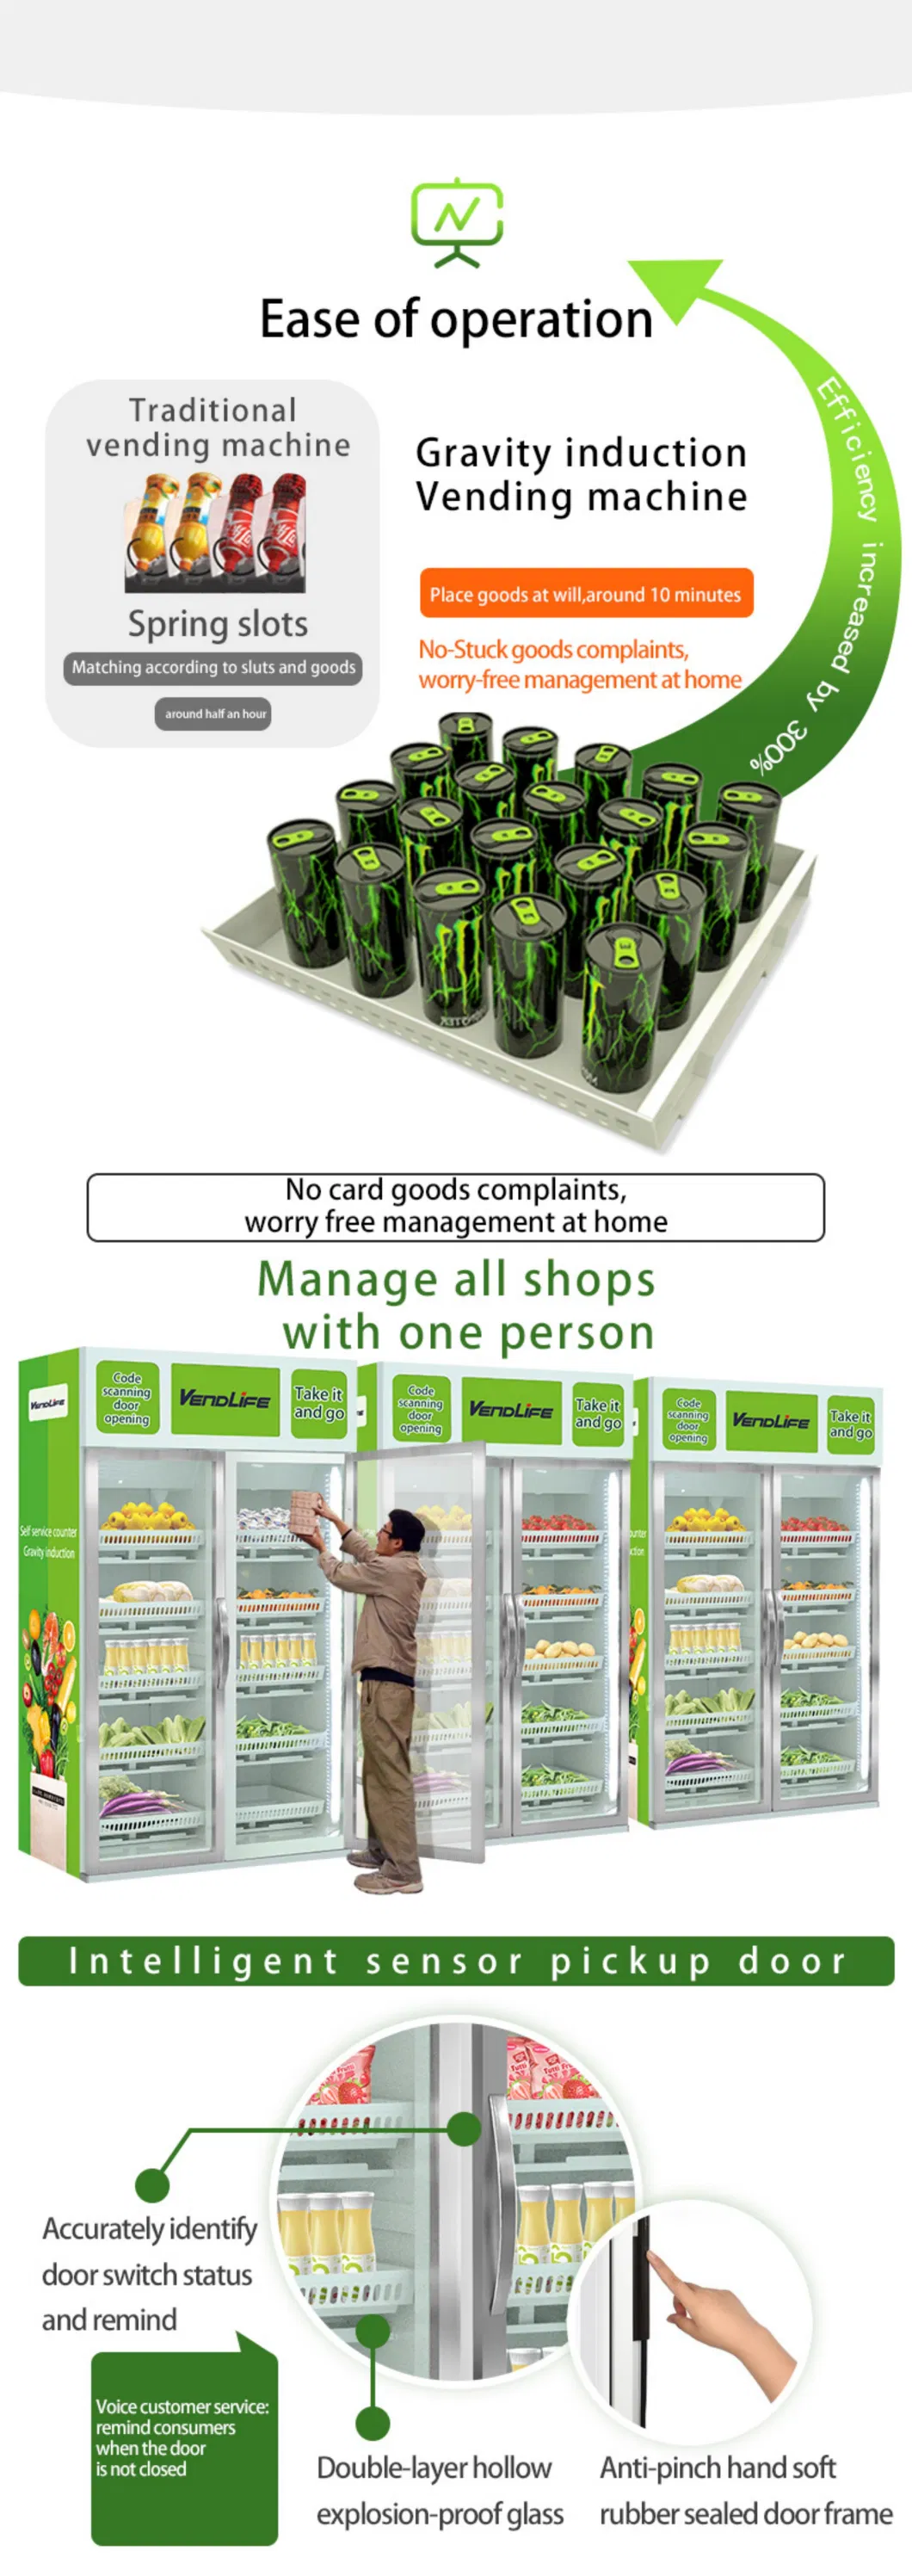 Vendlife Flower Vending Machine Is Remote-Controlled Refrigeration System and Energy Management System